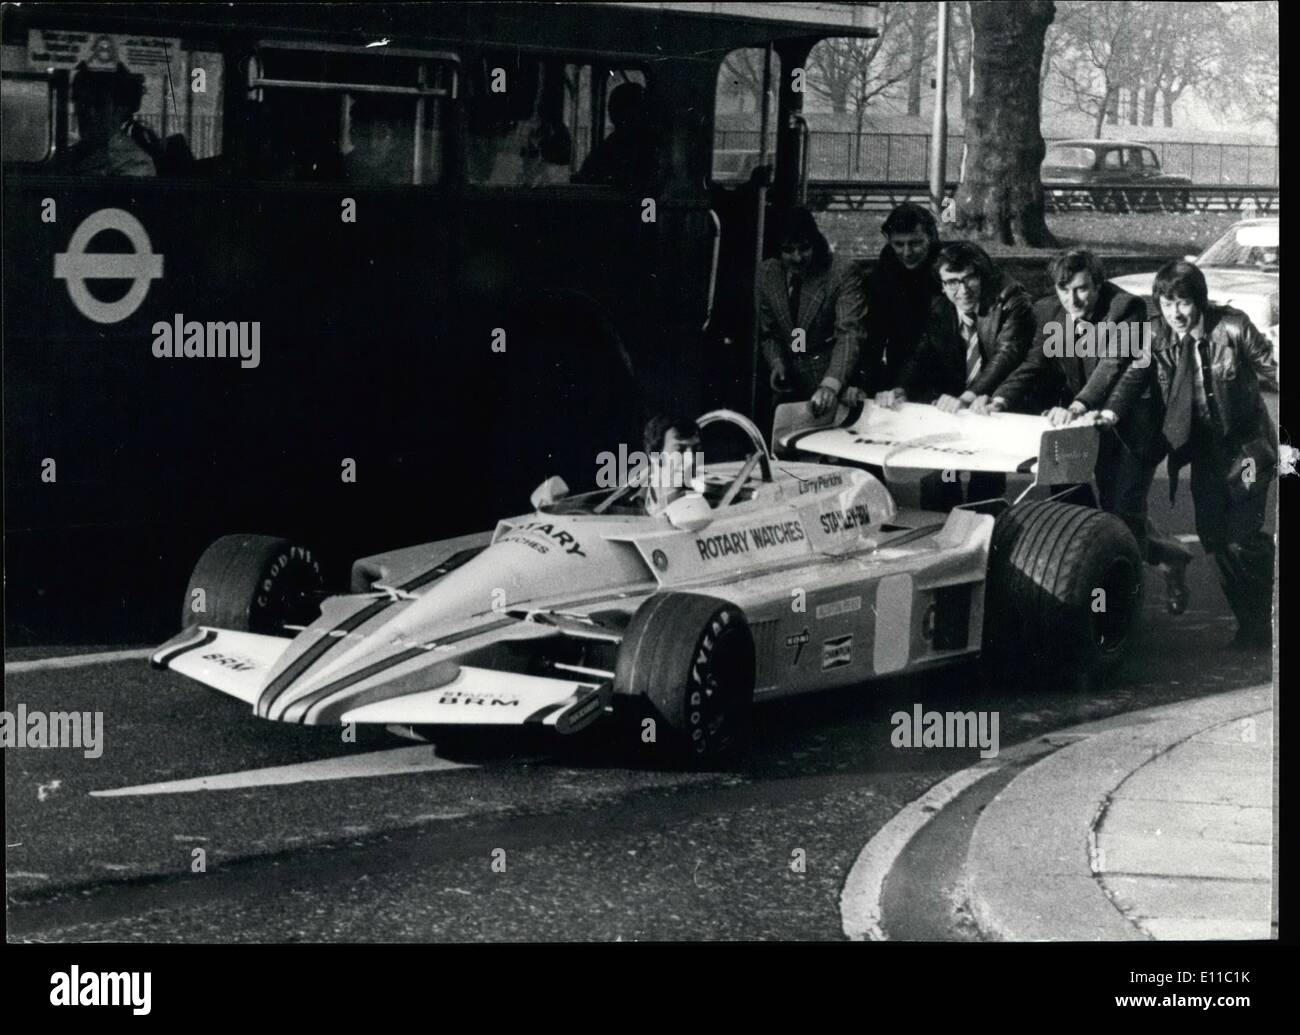 Dec. 12, 1976 - Introducing the new Stanley-BRM racing Car: BRM, once the great name in British motor-racing, will be back on the international scene next season. Louis Stanley, director of the new BRM team, unveiled their new car in London which has a completely redesigned V12 engine, producing almost 500 hp, a sleek new body and chasis. The No.1 driver will be Larry Perkins, a young Australian. Photo shows the new Stanley-BRM racing car being pushed into the Dorchester Hotel where it was on show to the press. Stock Photo